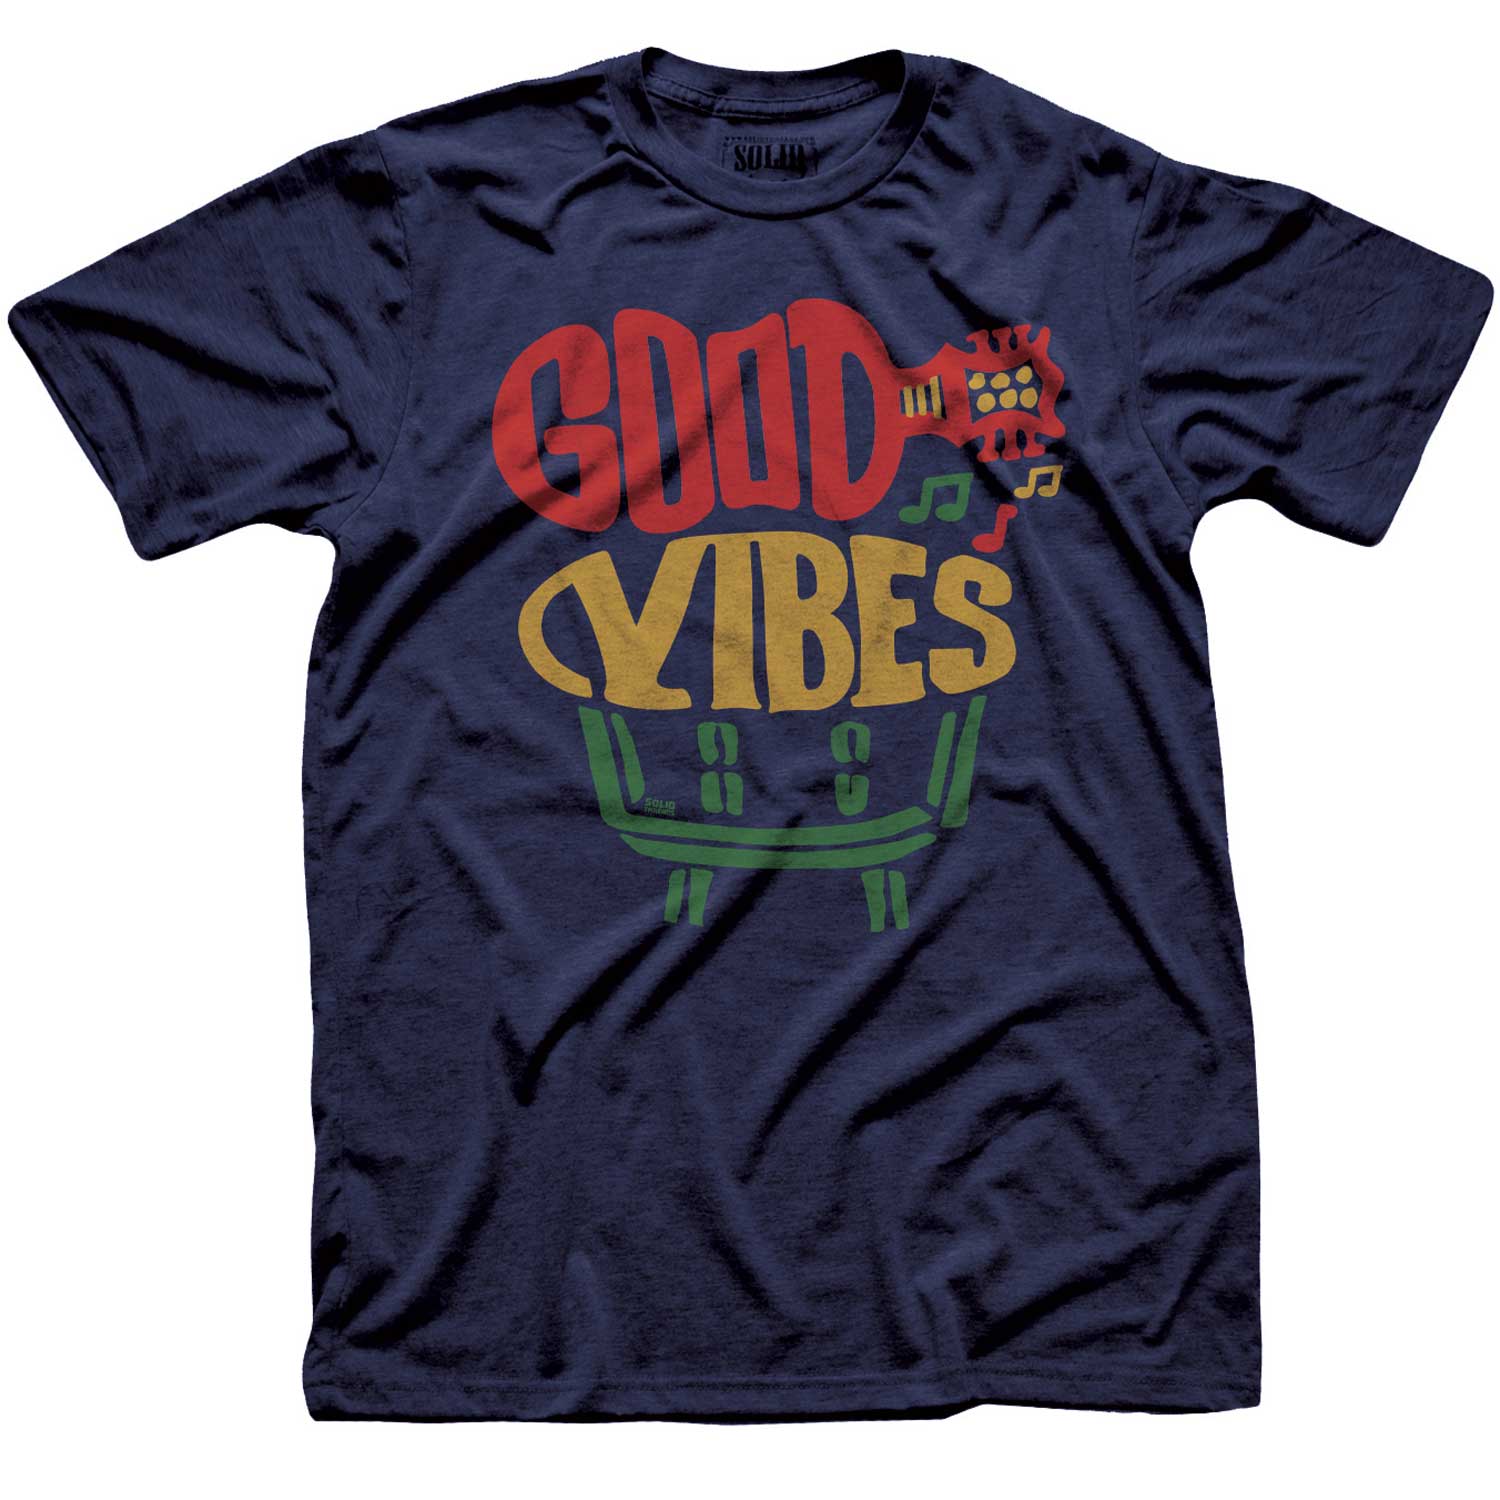 Men's Good Vibes Vintage Graphic Tee | Retro Music T-shirt | Solid Threads